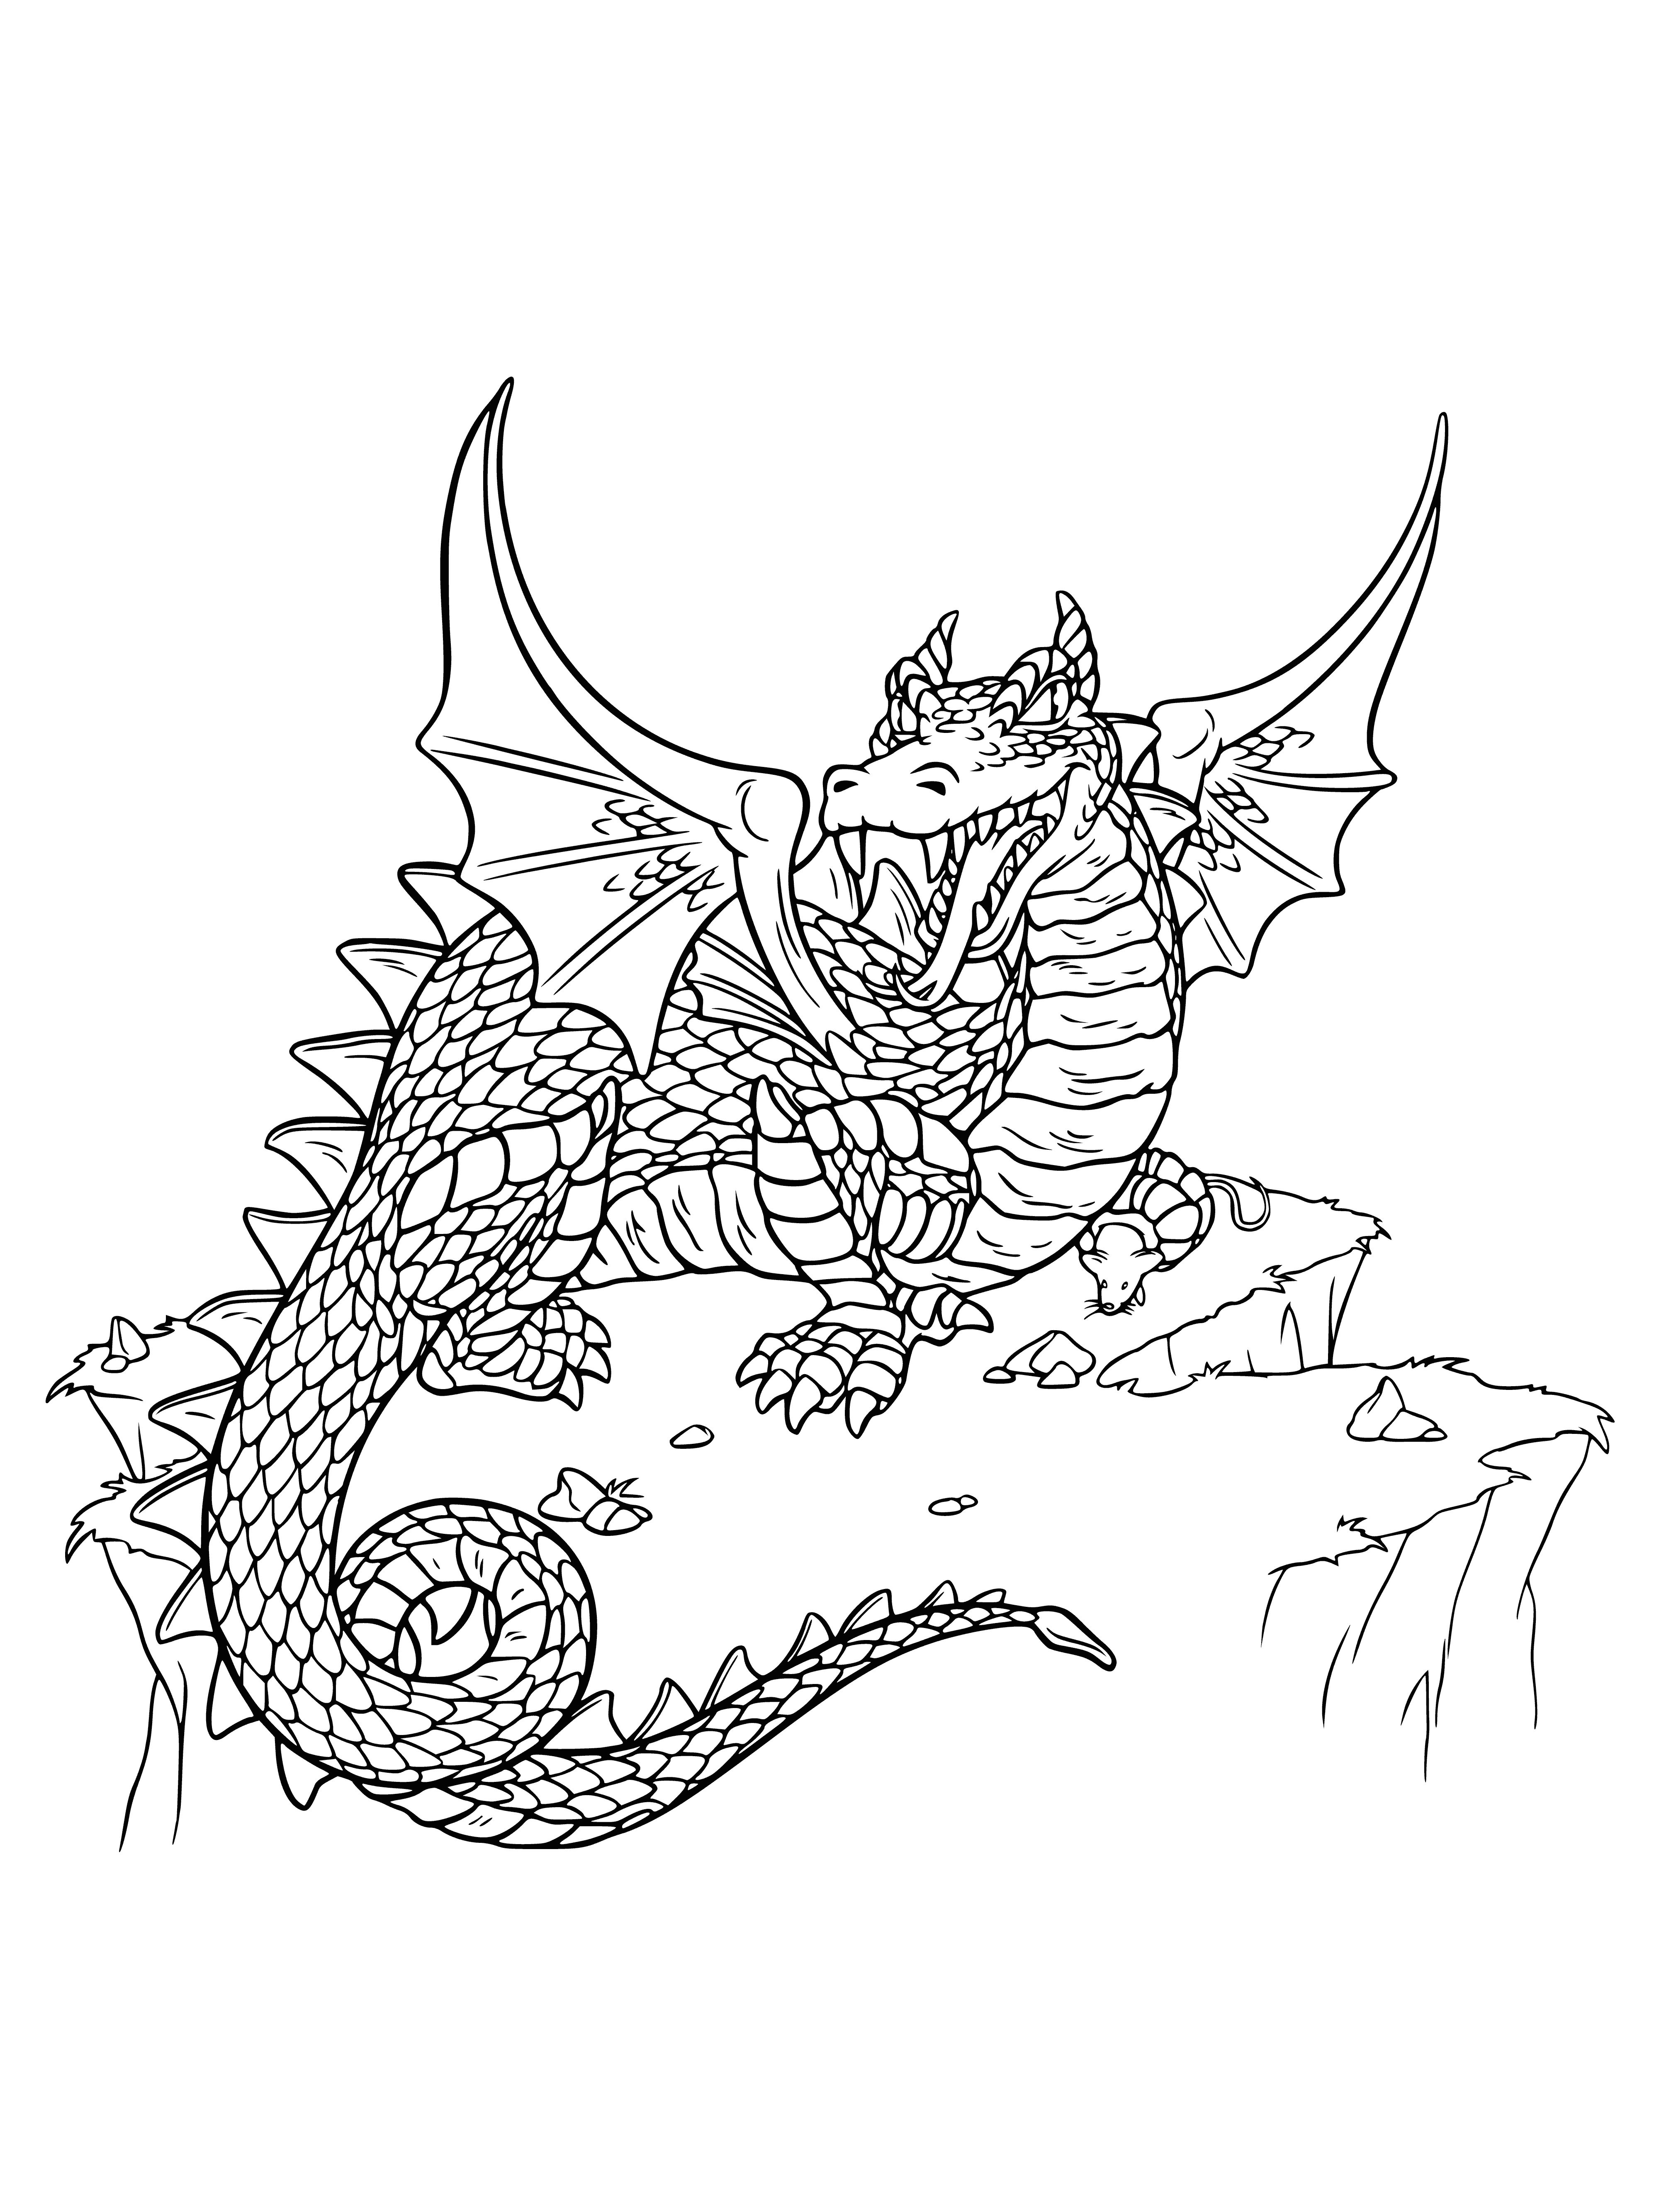 coloring page: Harry Potter flies on his broomstick, determined to dodge the dragon's flames, amidst a sky of red and orange.